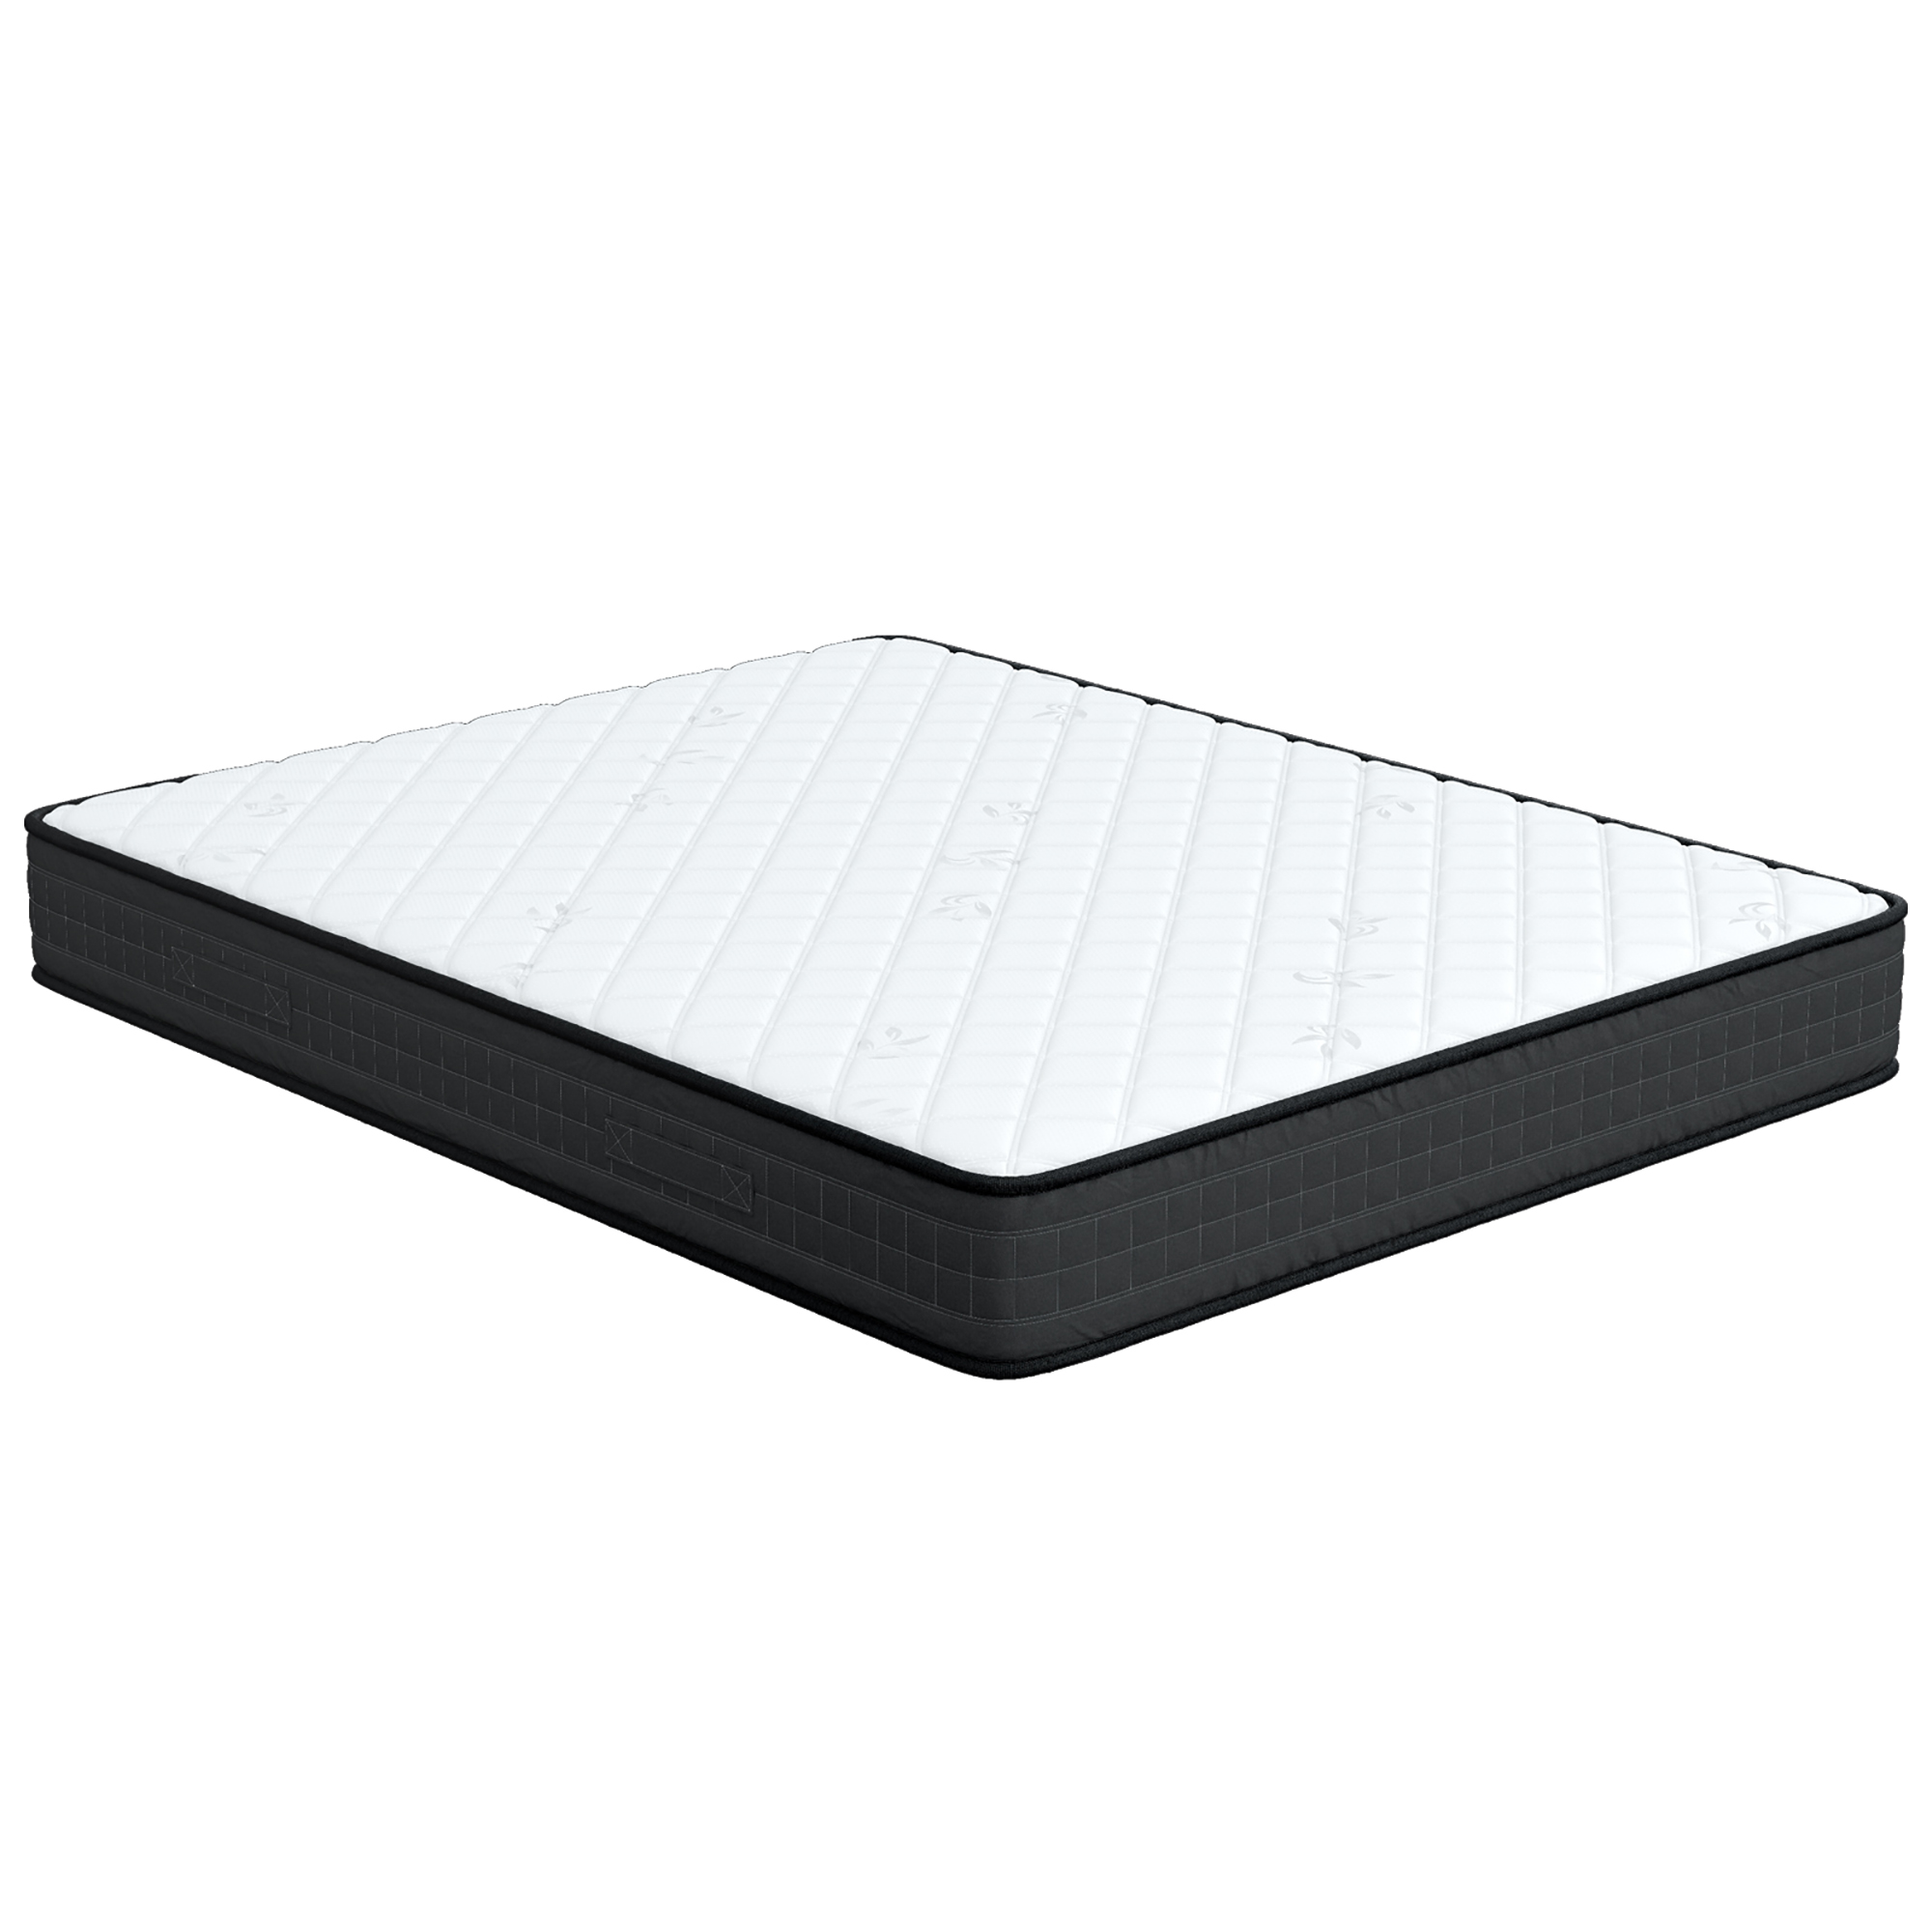 Costway 8'' Queen/Full/King Size Memory Foam Bed Mattress Medium Firm Breathable Pressure Relieve